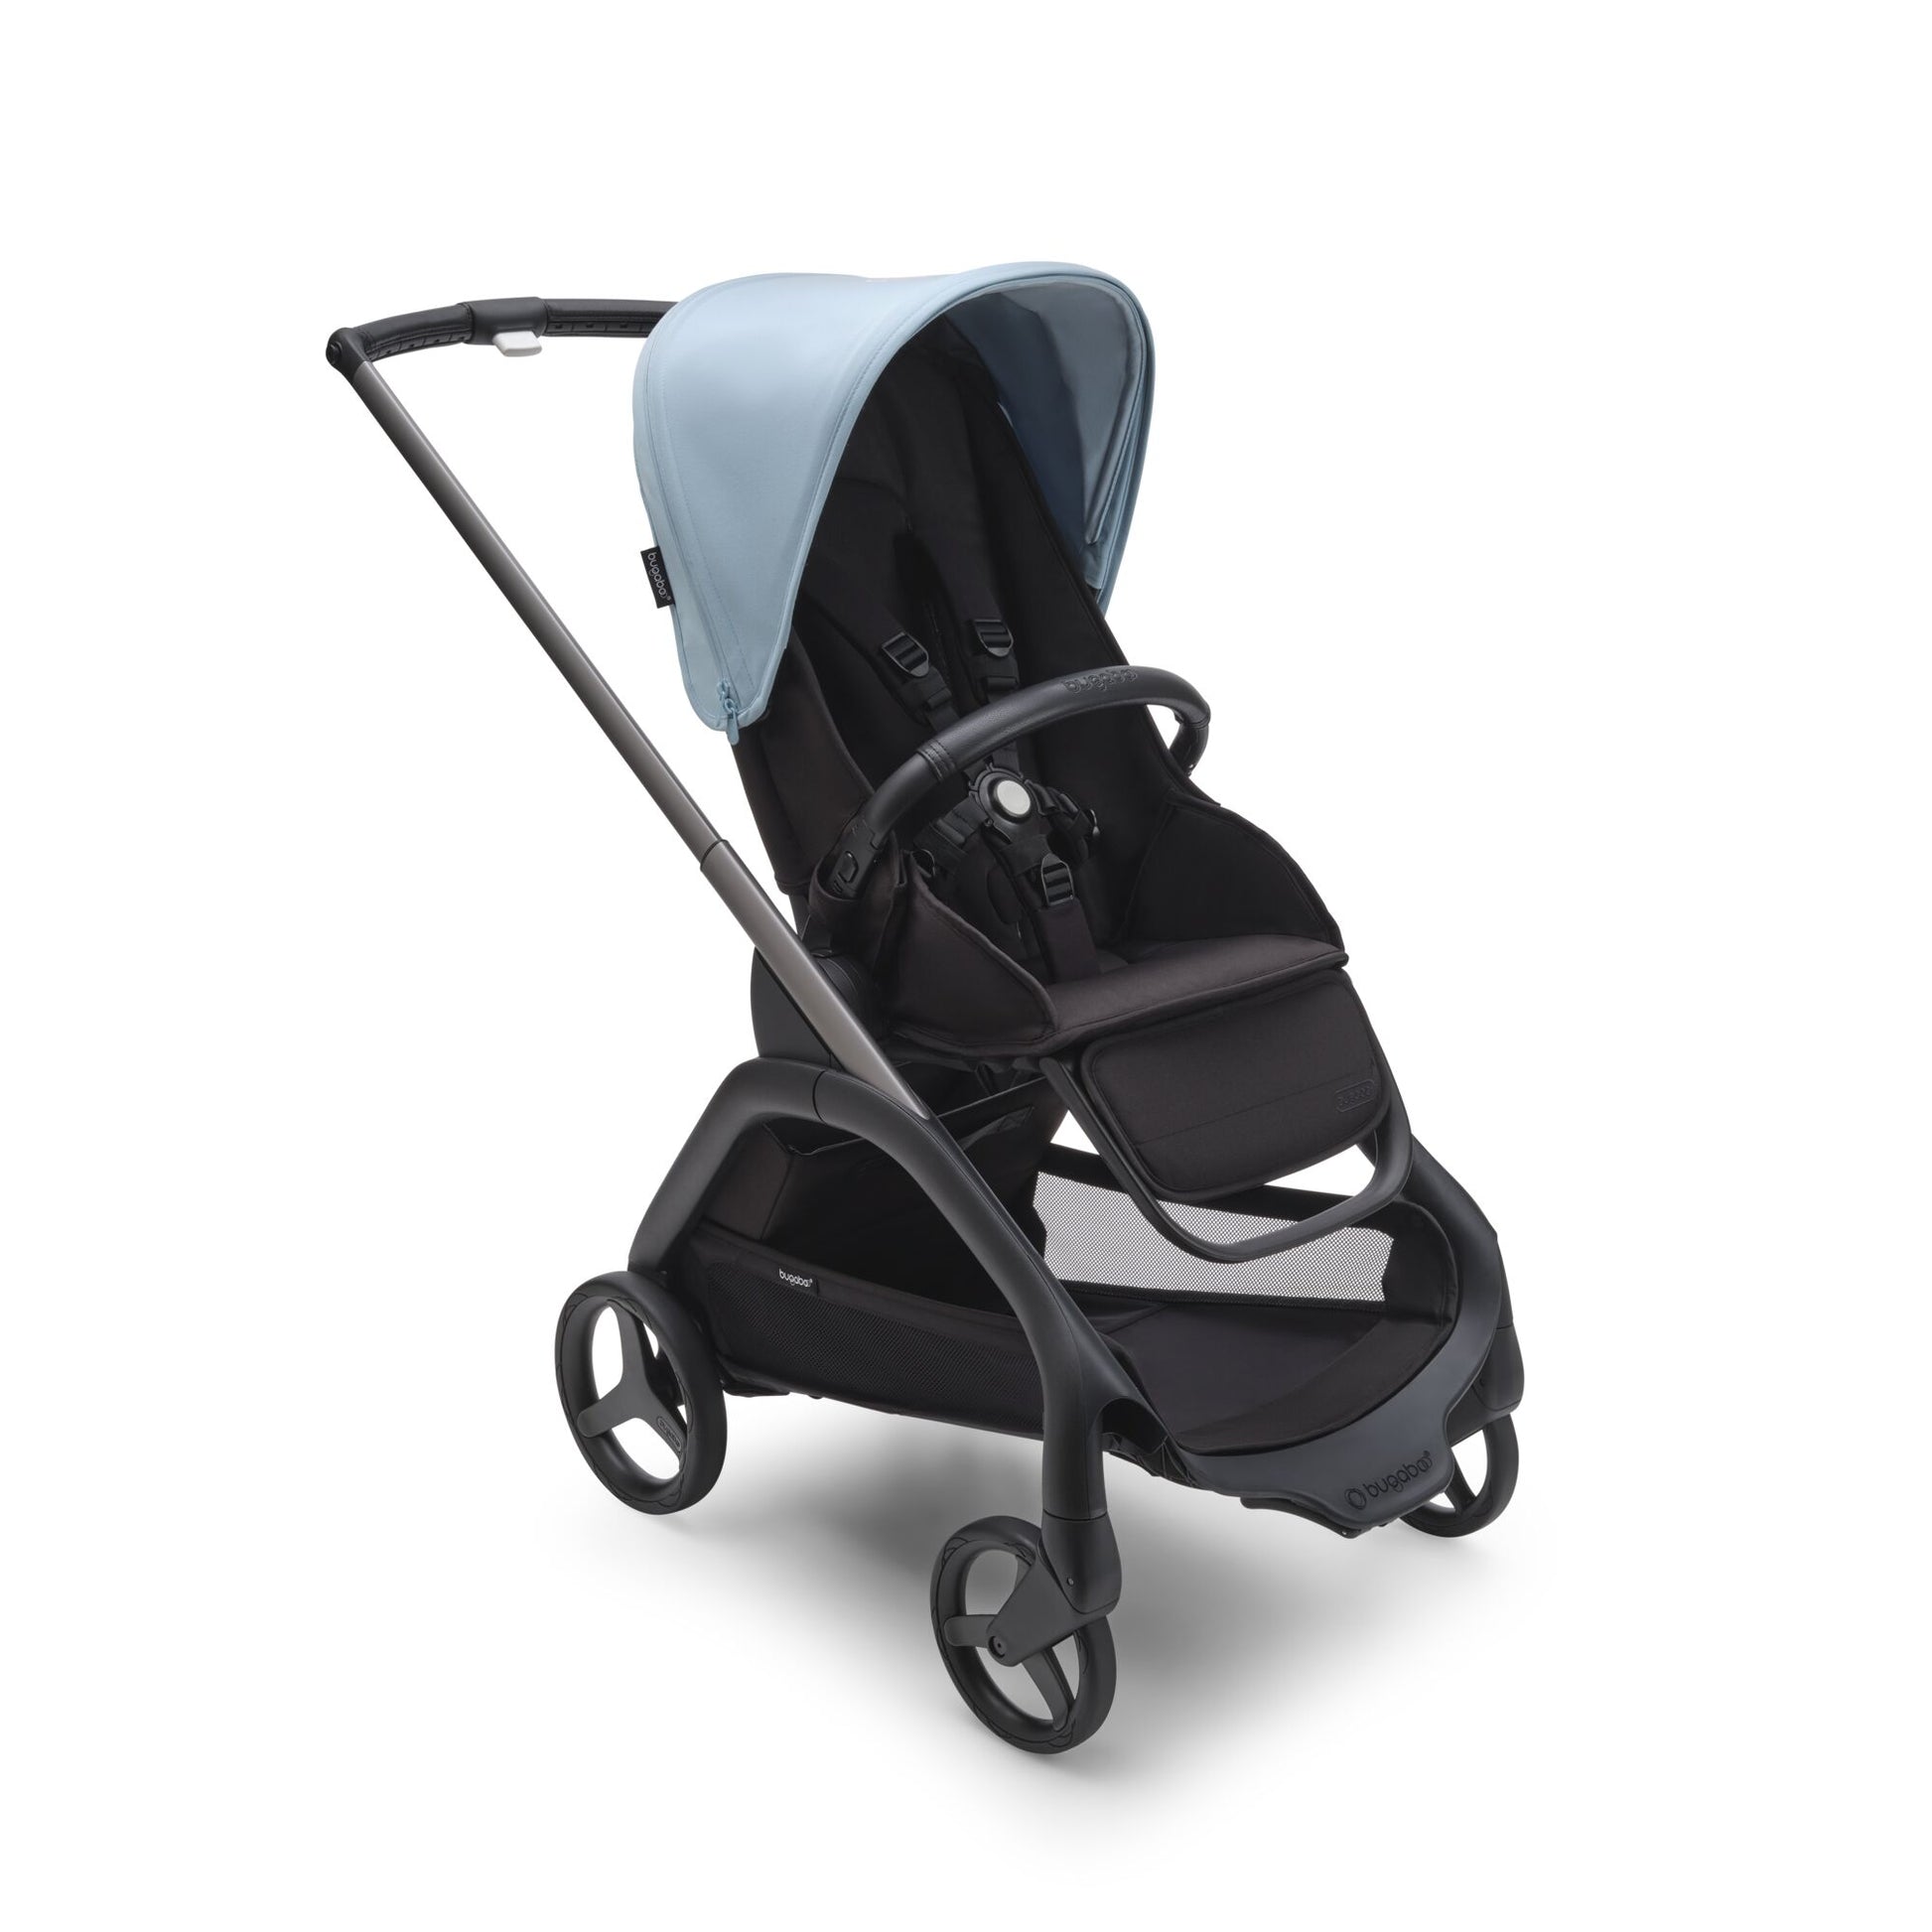 Bugaboo Dragonfly Sun Canopy - Skyline Blue on Bugaboo Dragonfly stroller with shade pulled back